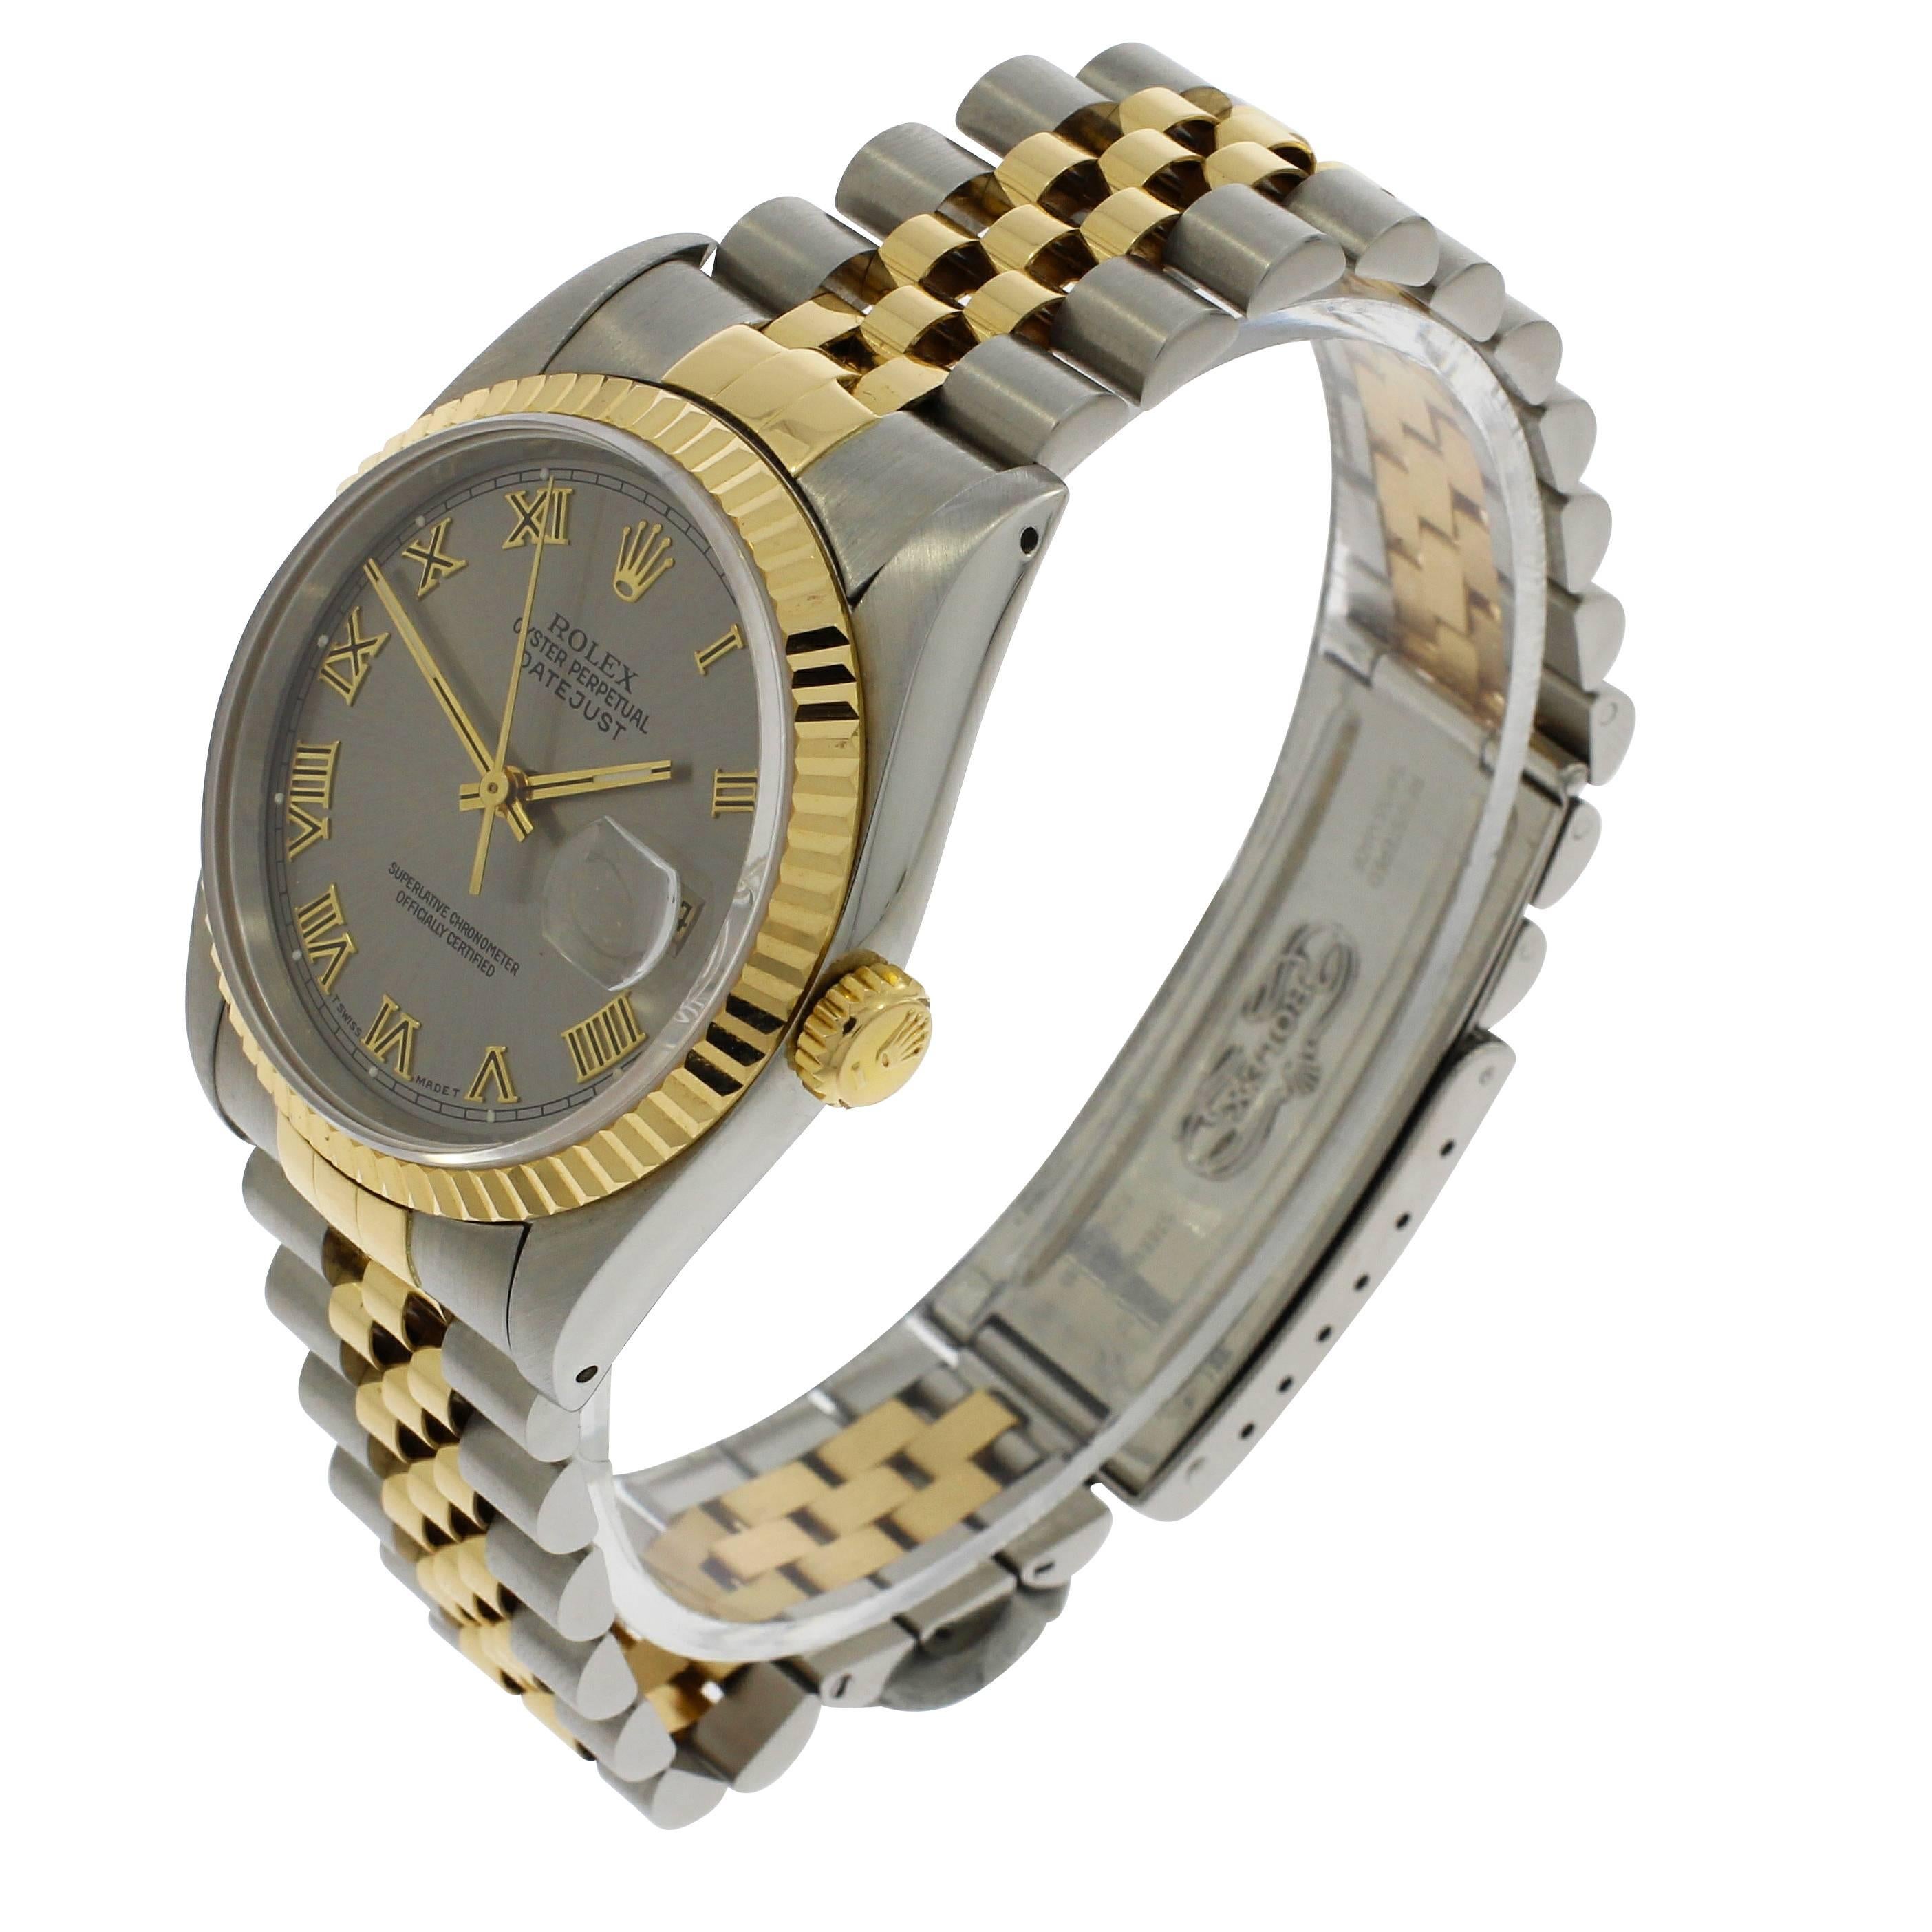 Rolex Yellow Gold Stainless Steel Datejust Wristwatch Ref 16233, 1990 In Excellent Condition For Sale In Epsom, Surrey